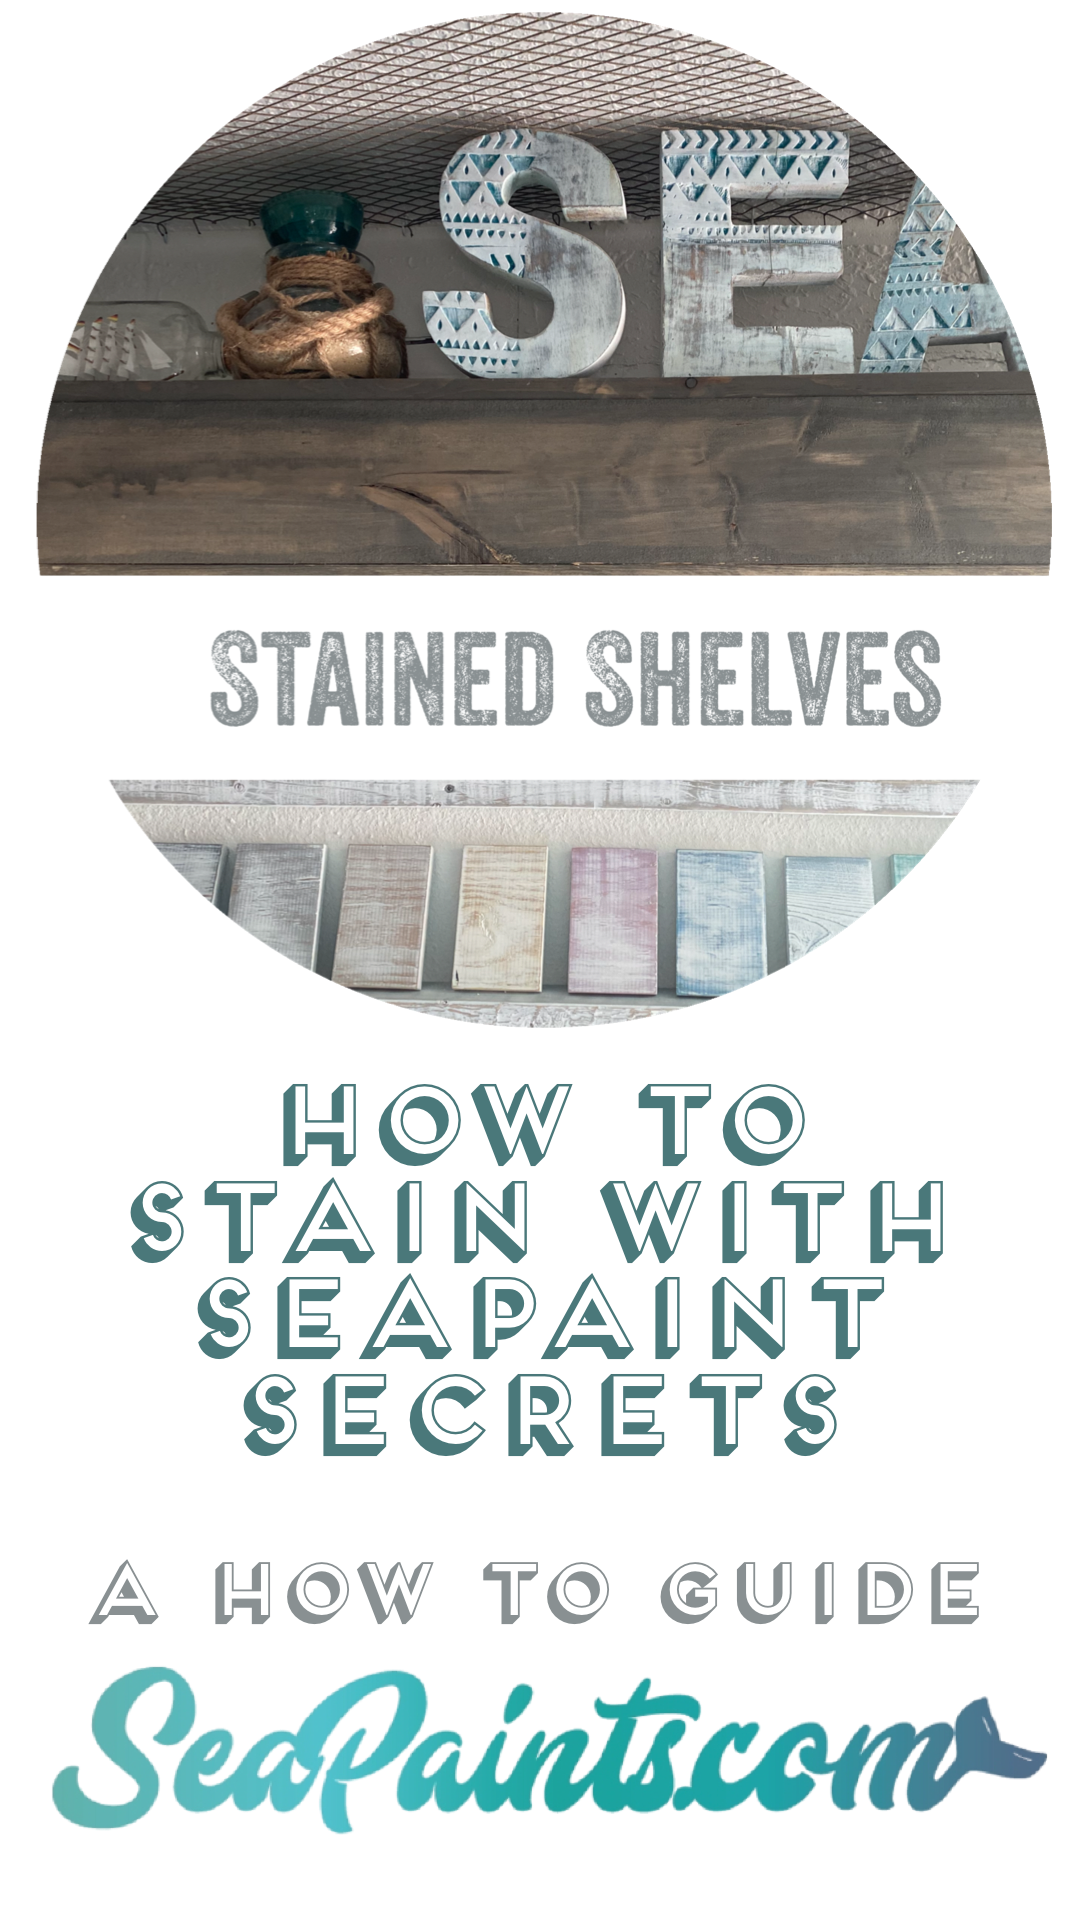 HOW TO STAIN WITHOUT FUMES